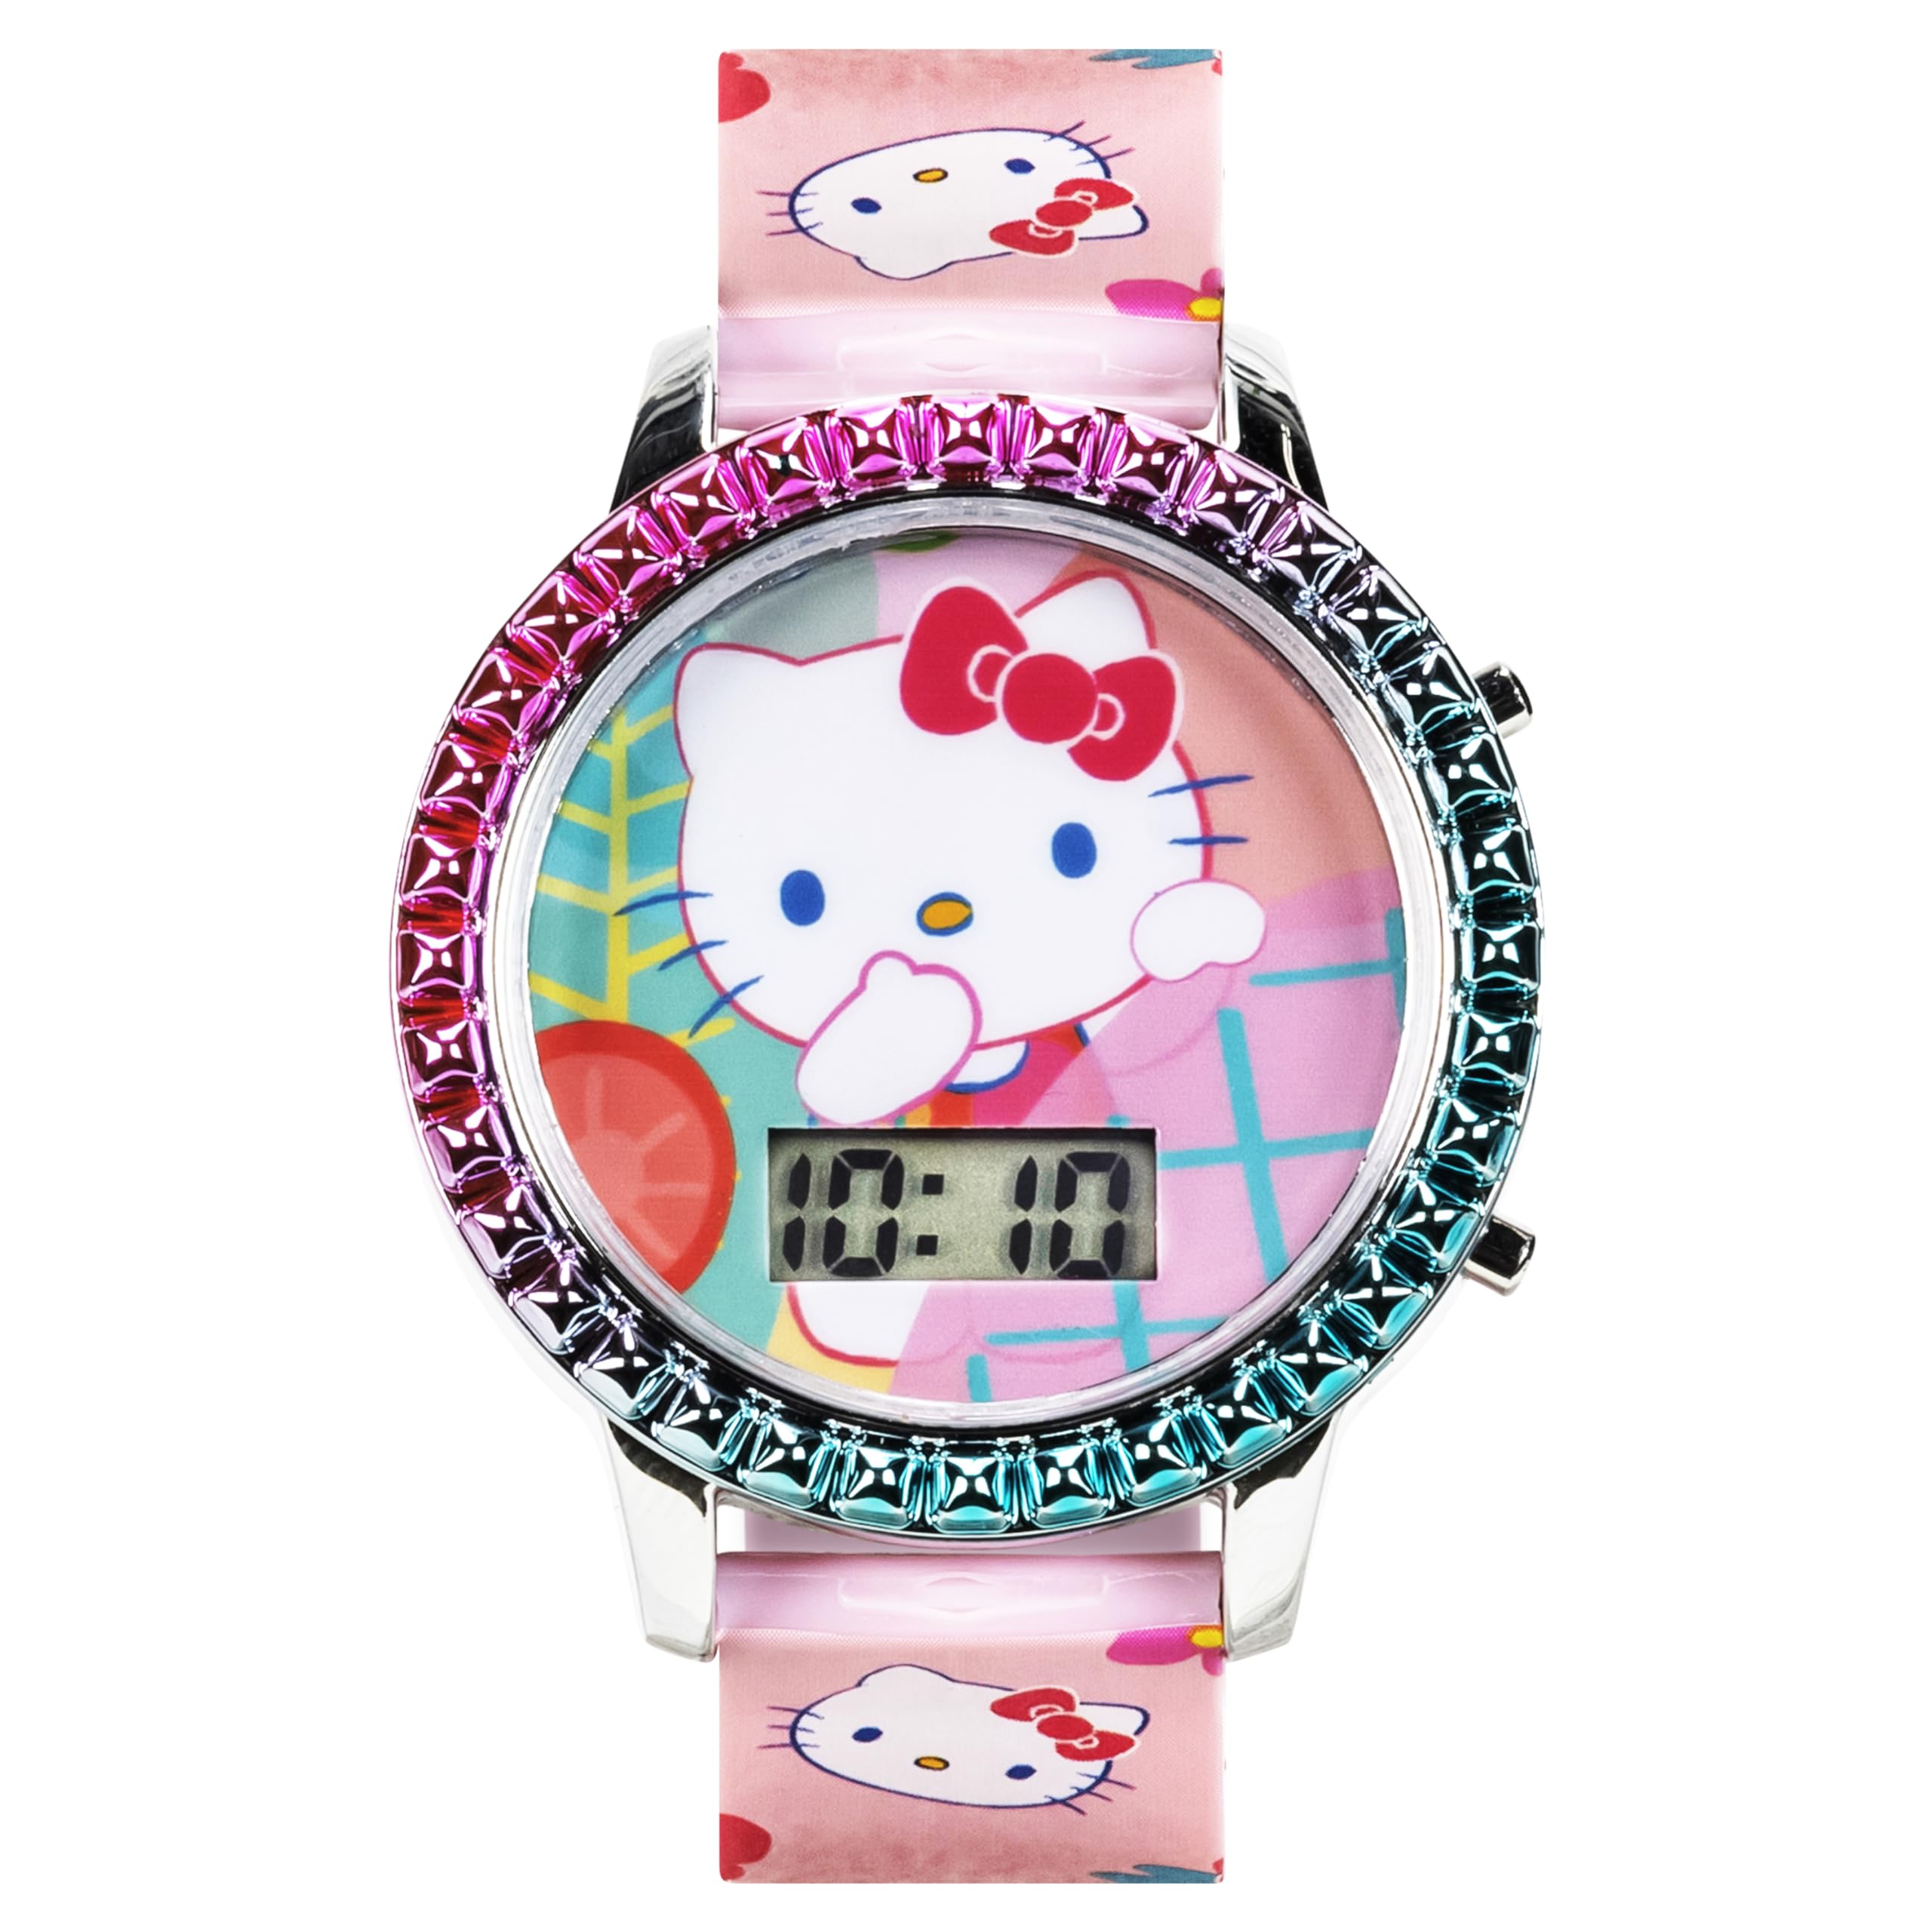 Accutime Hello Kitty Digital LCD Quartz Kids Pink Watch for Girls with Hello Kitty and Friends Pink All Over Print Band Strap (Model: HK4167AZ)